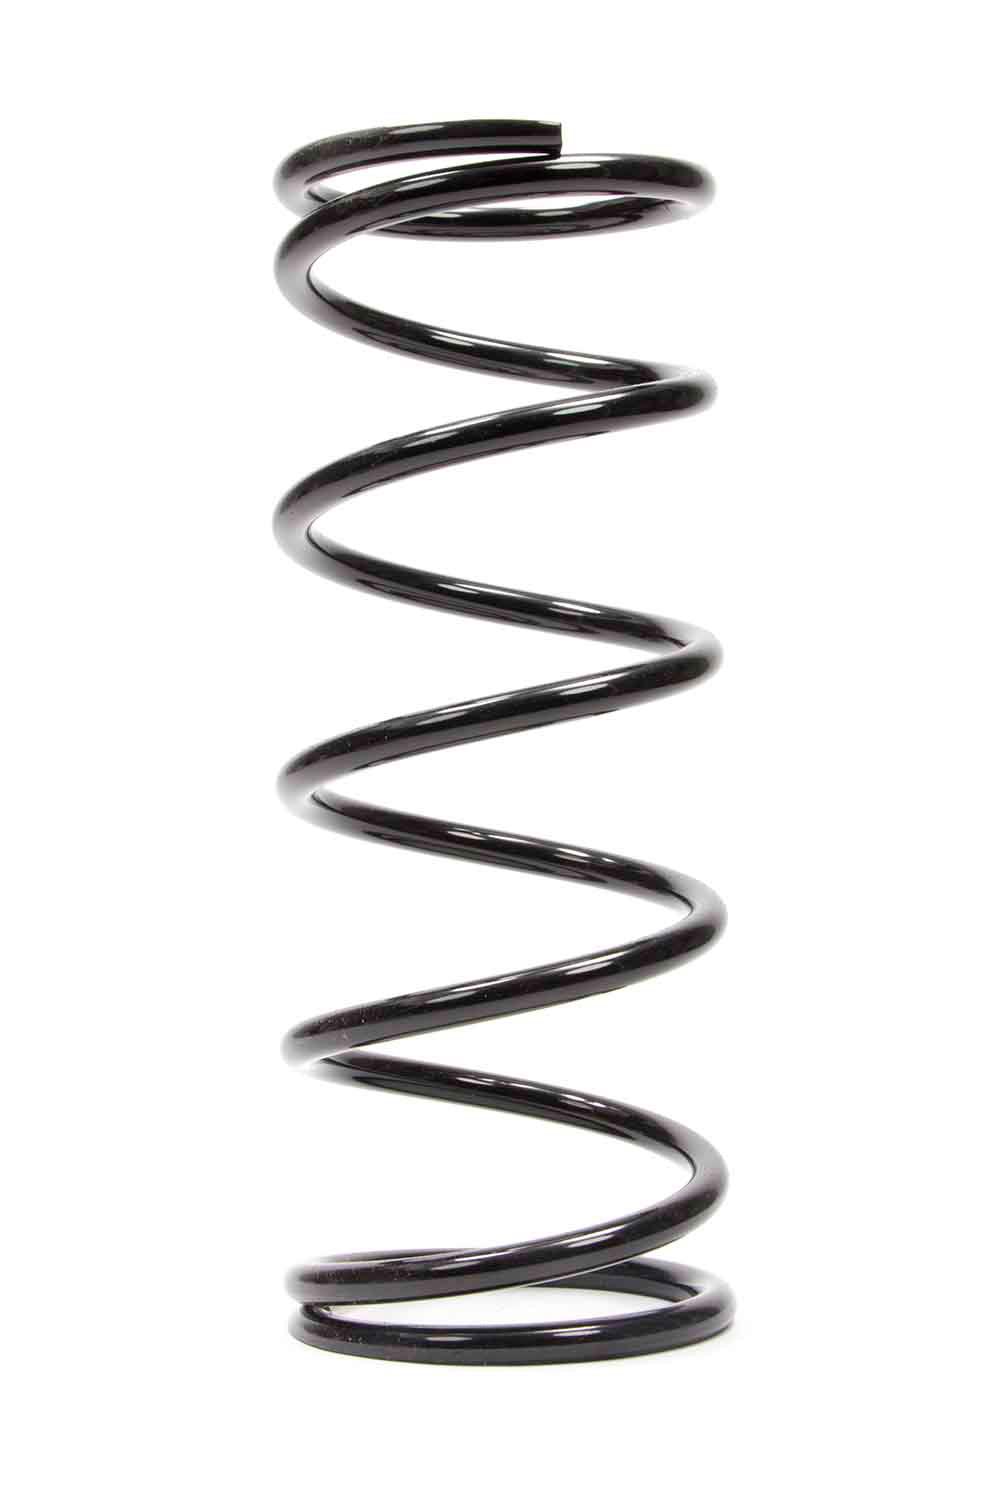 Conv Rear Spring 5in x 13in x 225 - Burlile Performance Products